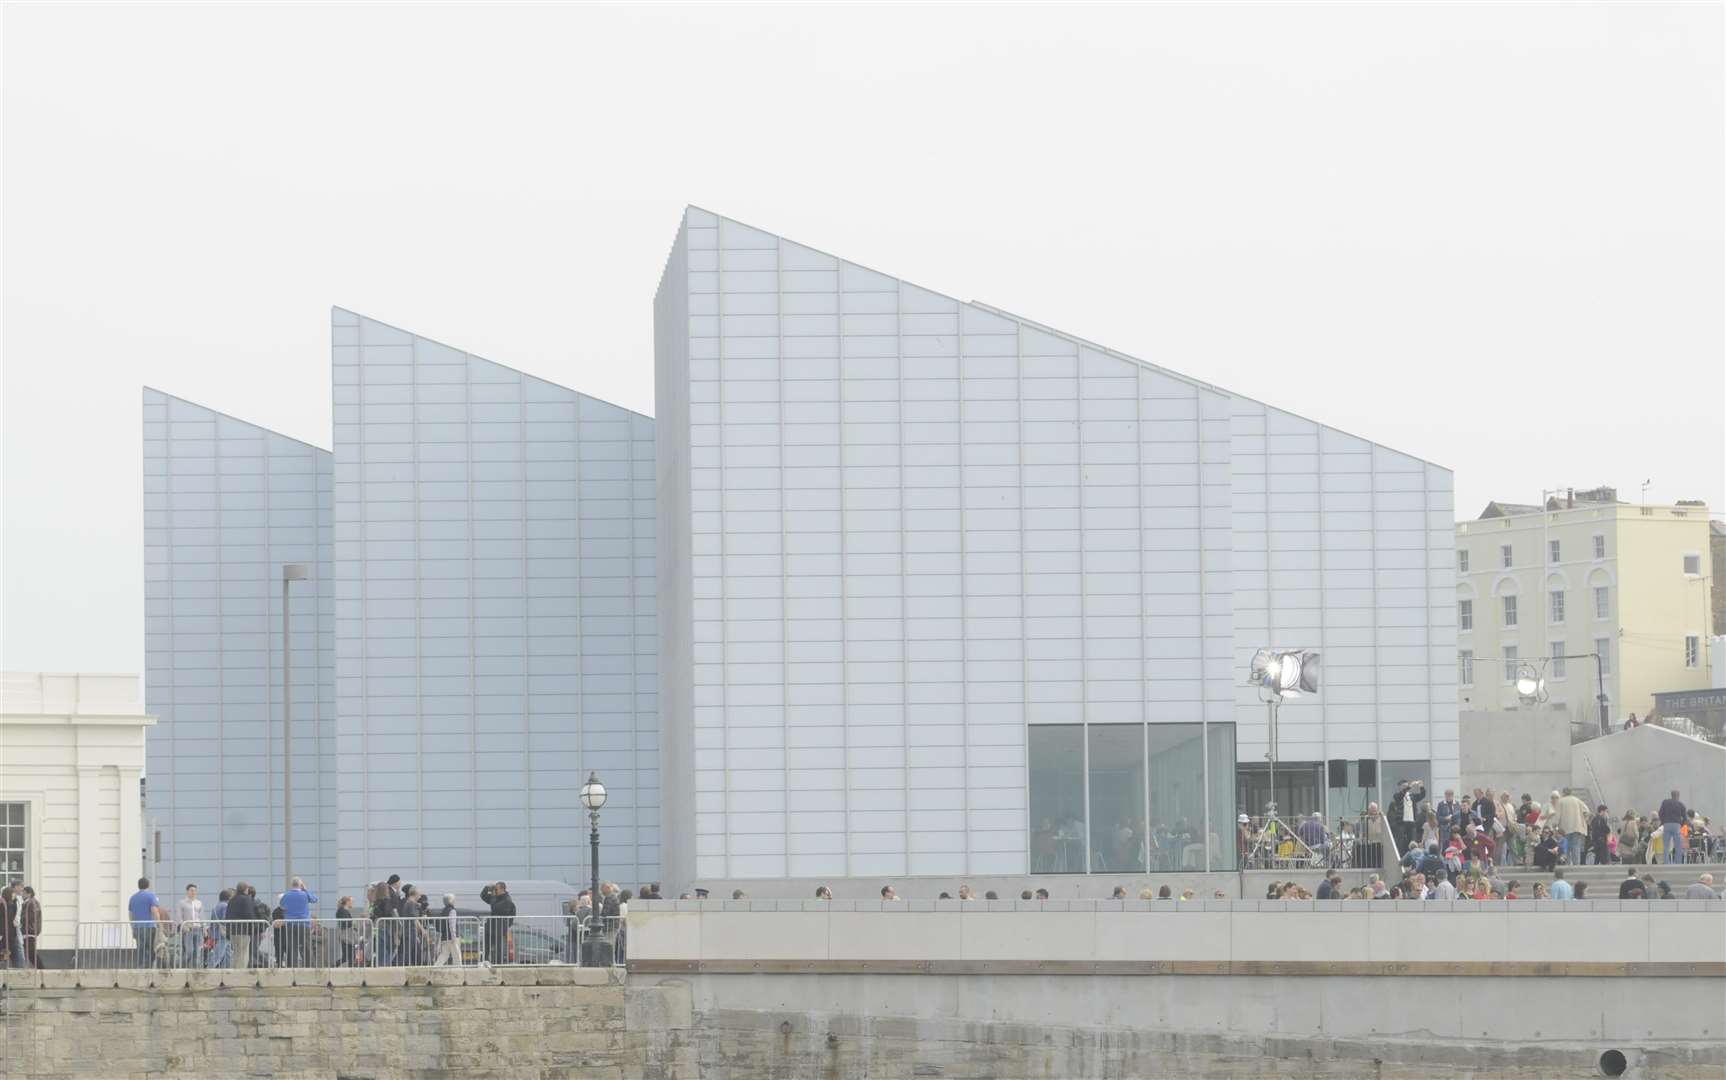 Turner Contemporary Gallery opens in Margate